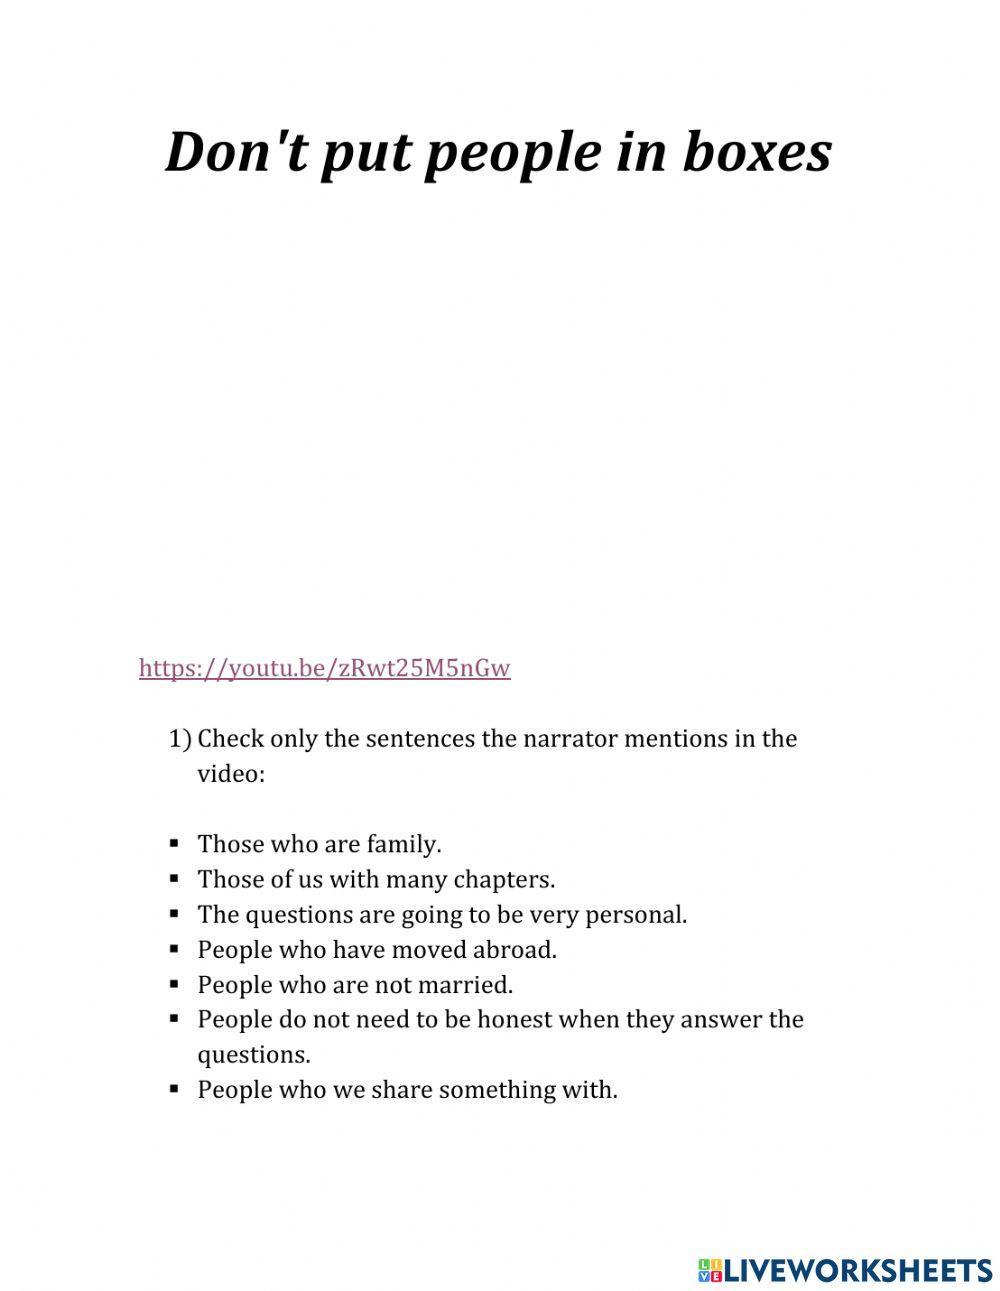 Don't put people in boxes